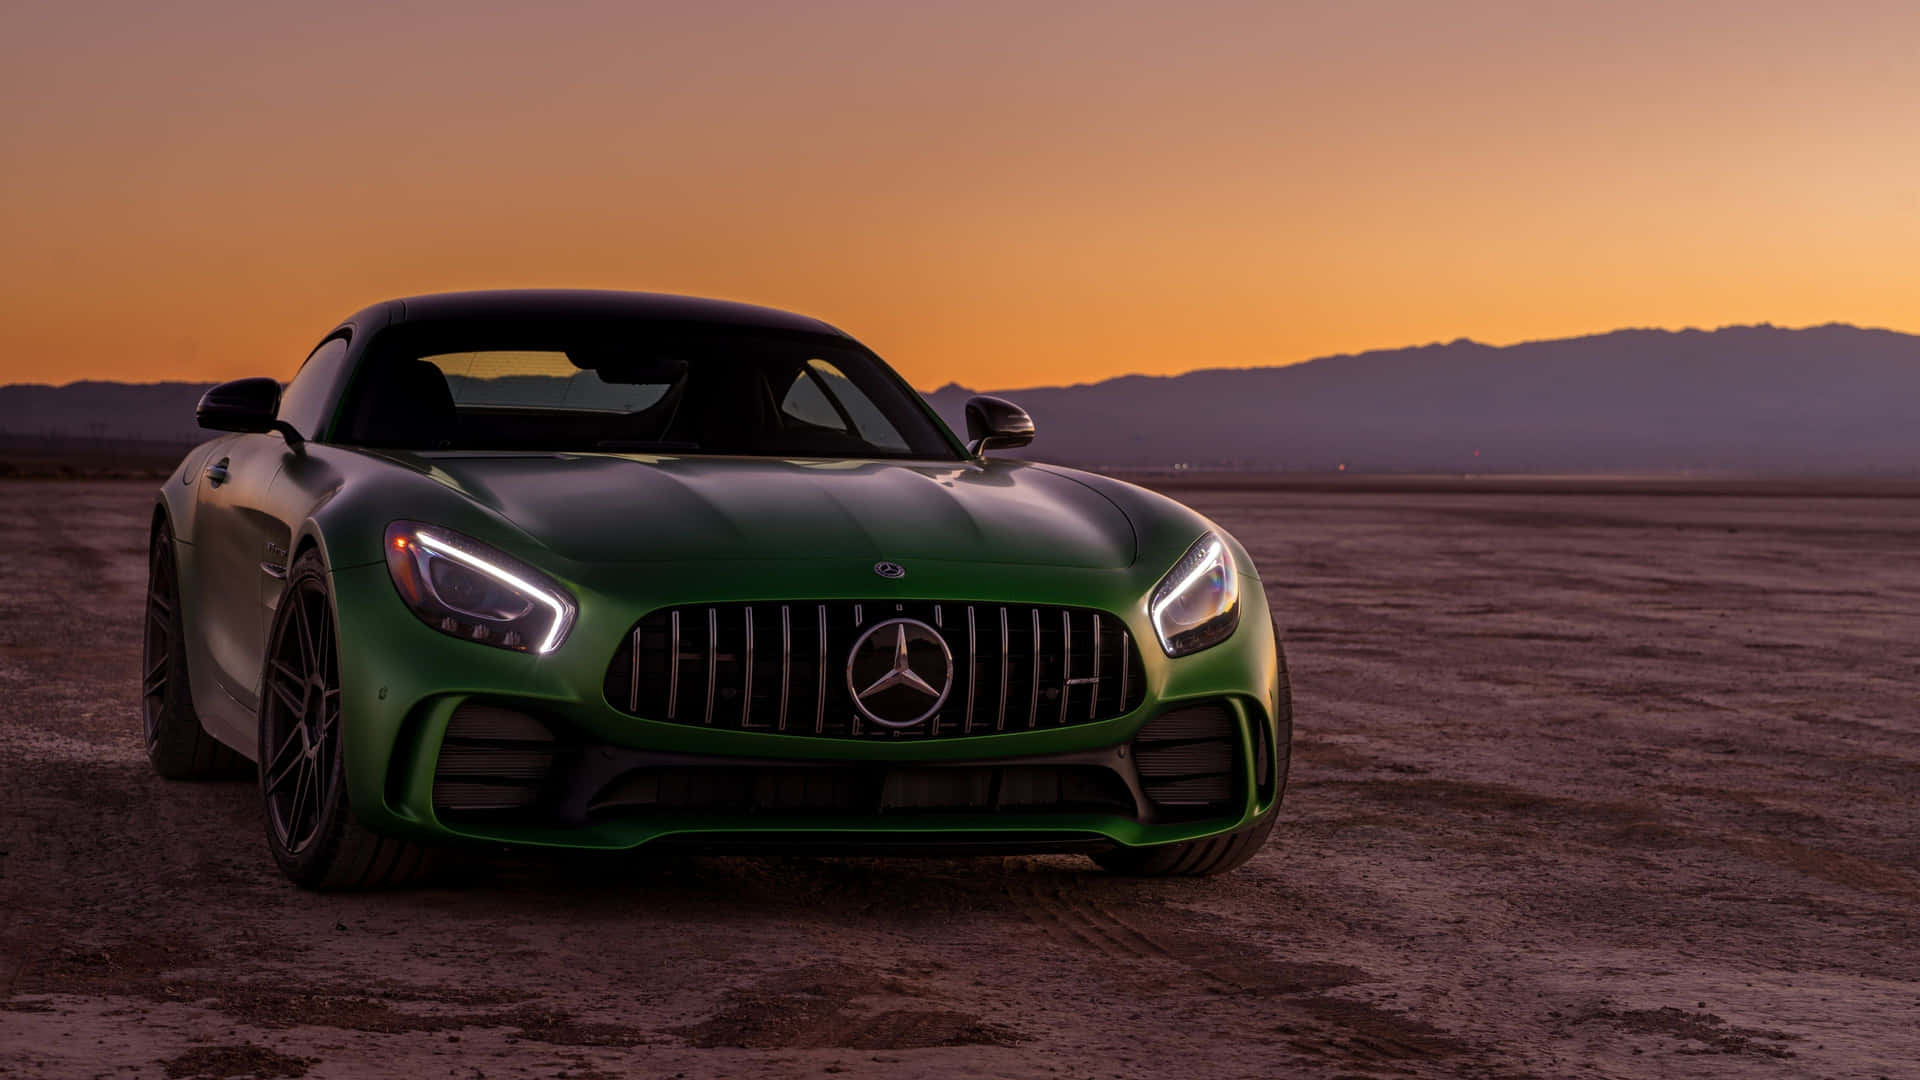 Green Mercedes Benz Amg Gt R With Sunset Sky Background